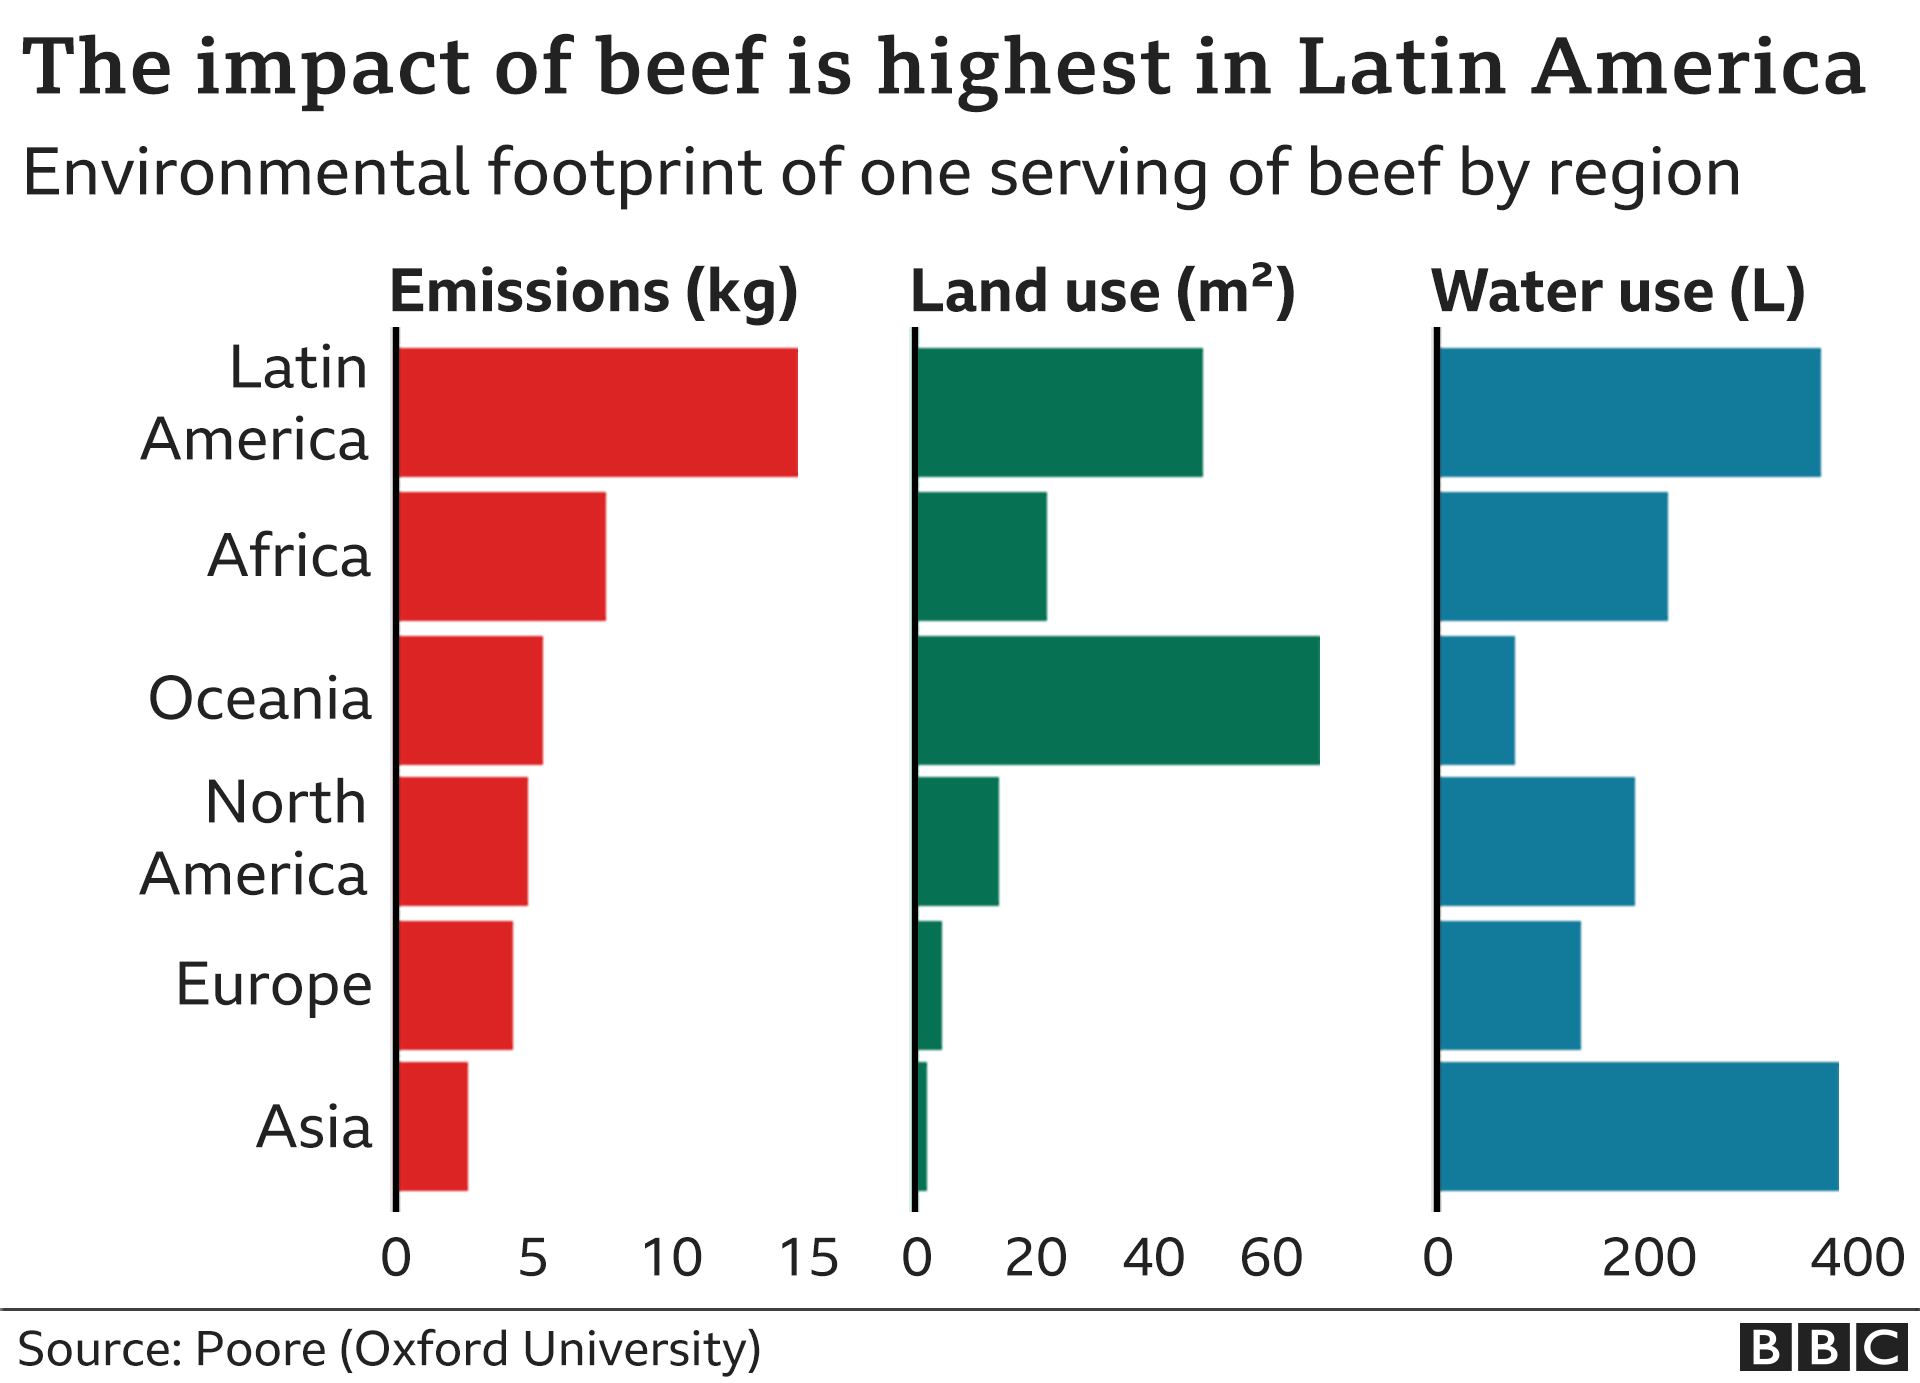 Chart showing the climate impacts of beef by region: Beef has the highest carbon footprint in Latin America and the lowest impact in Europe and Asia. It has the biggest land use in Oceania, followed by Latin America and the biggest water use is in Asia, followed by Latin America.